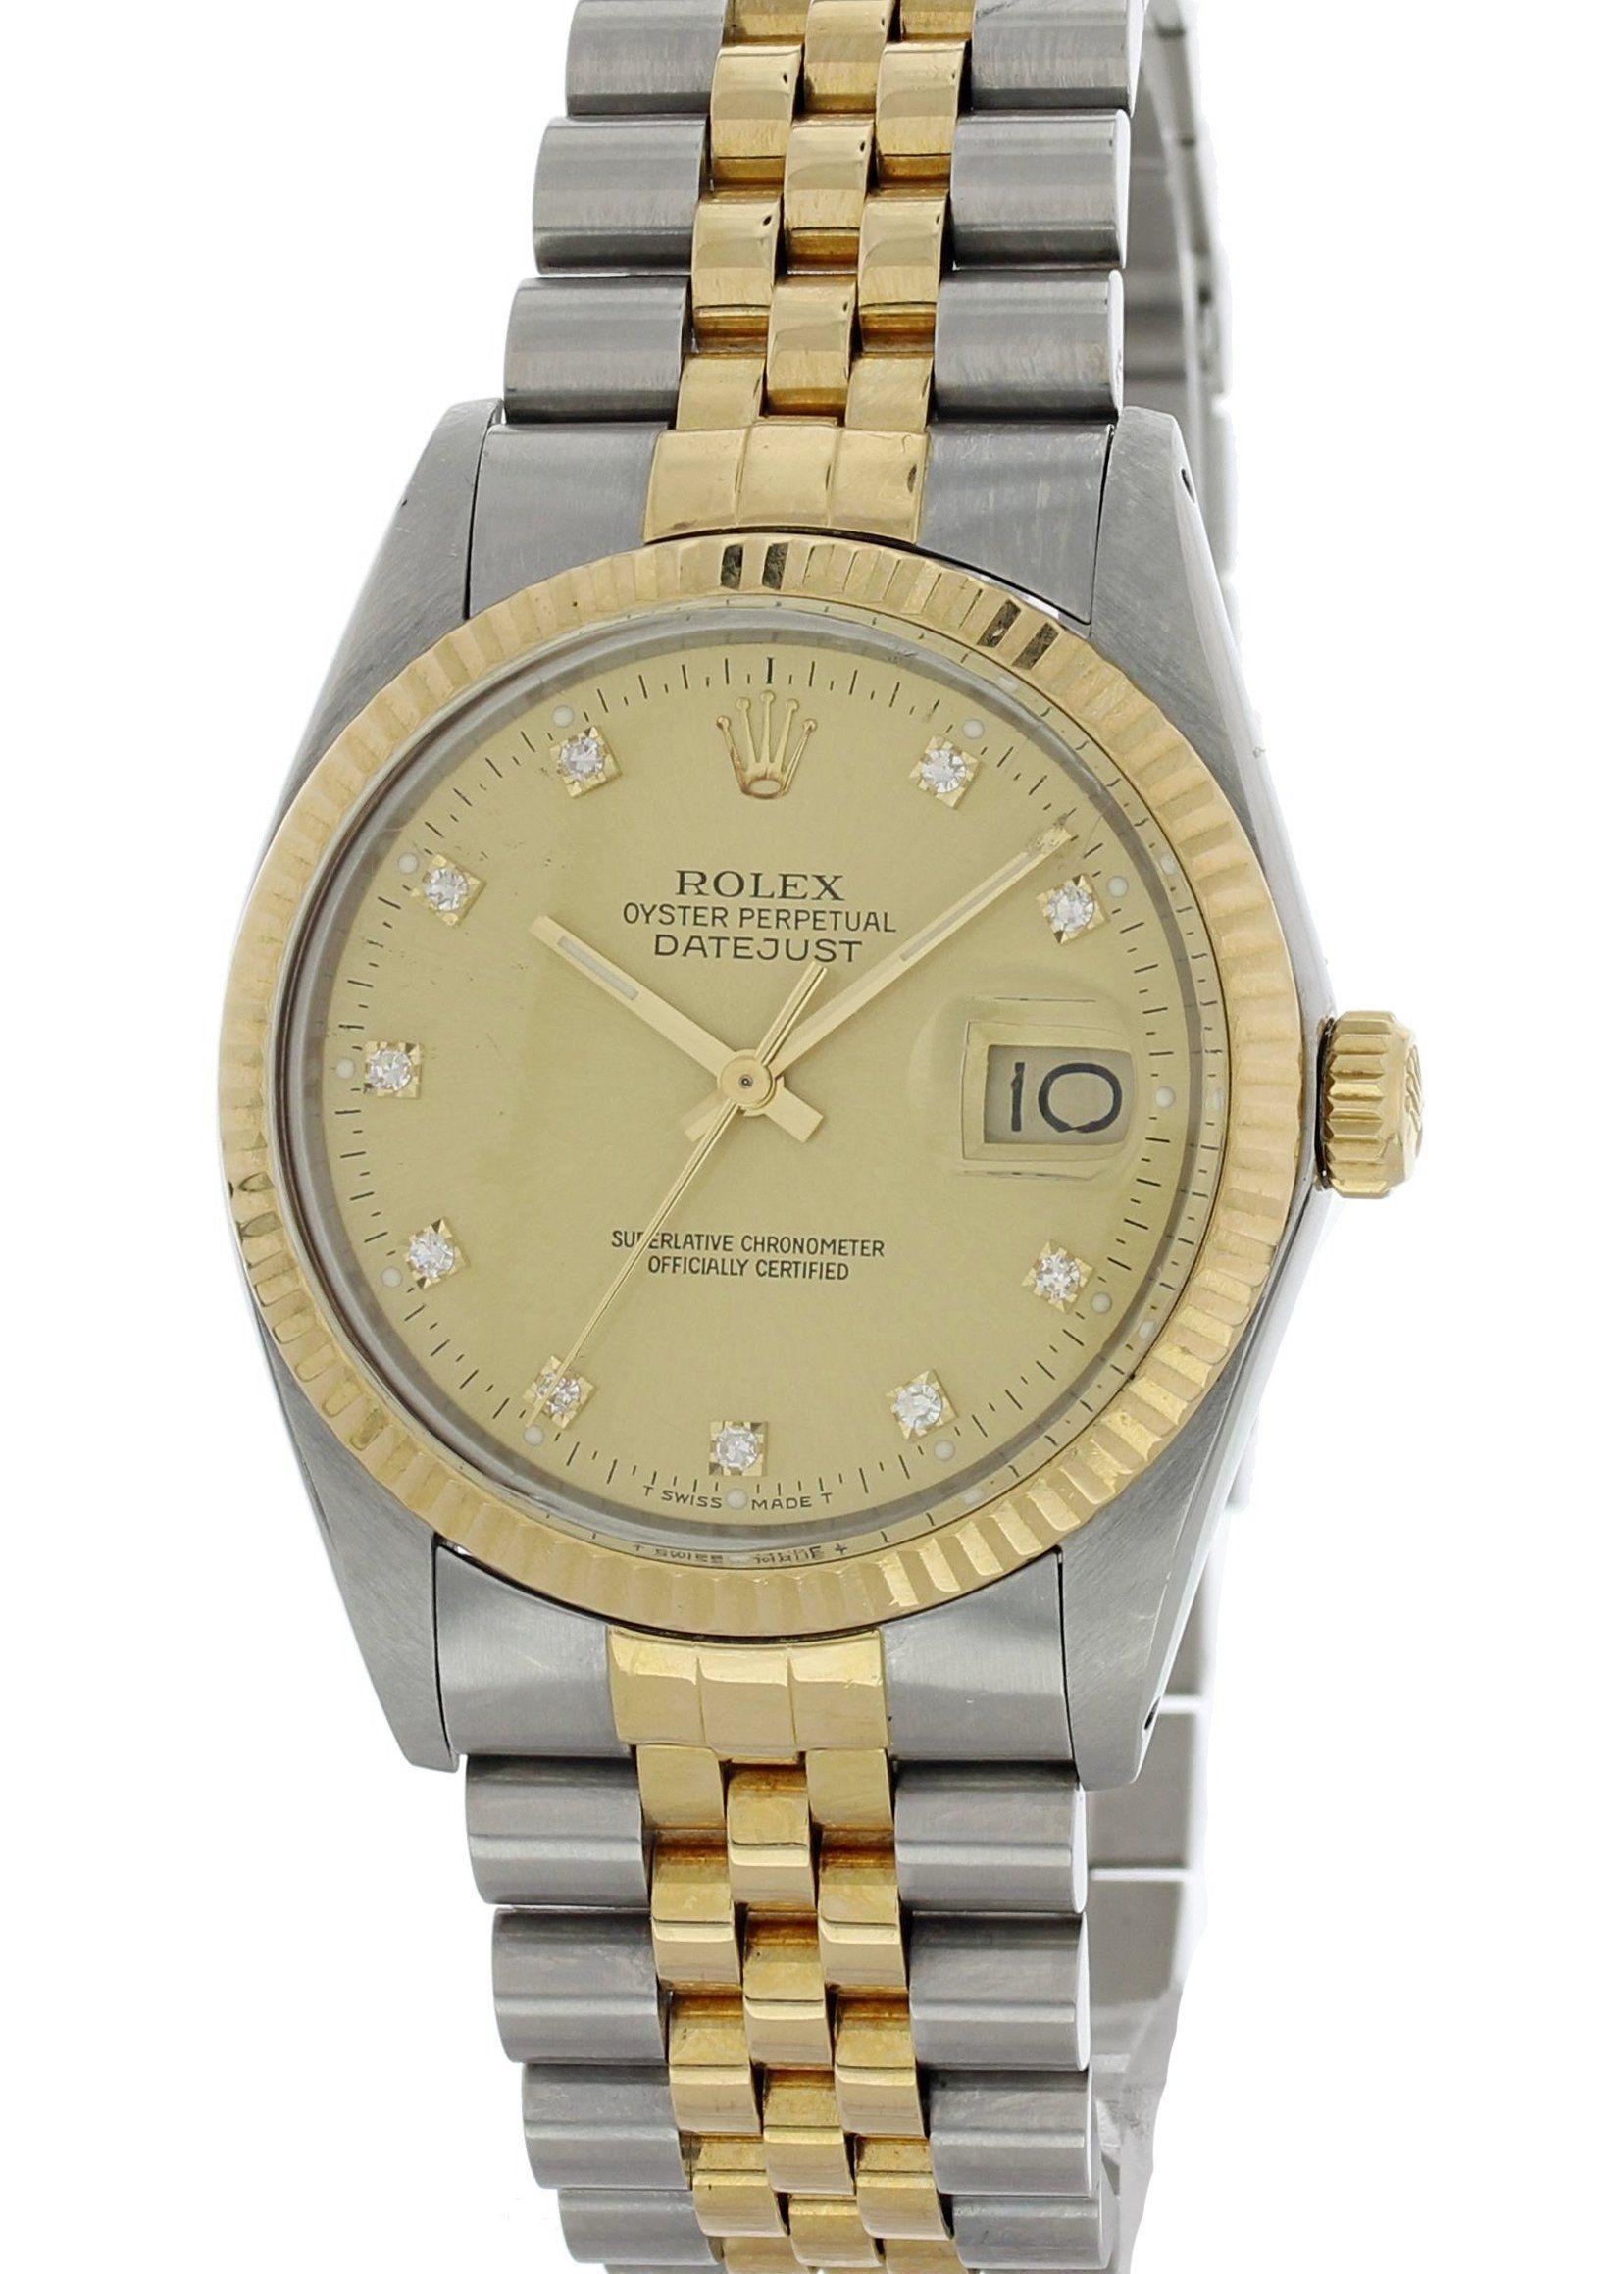 Rolex Oyster Perpetual Datejust 16013 Mens Watch. Stainless steel 36mm case with an 18k yellow gold fluted bezel. Champagne dial with gold hands and factory placed diamond hour markers. Quickset date display. Two-tone jubilee bracelet with stainless